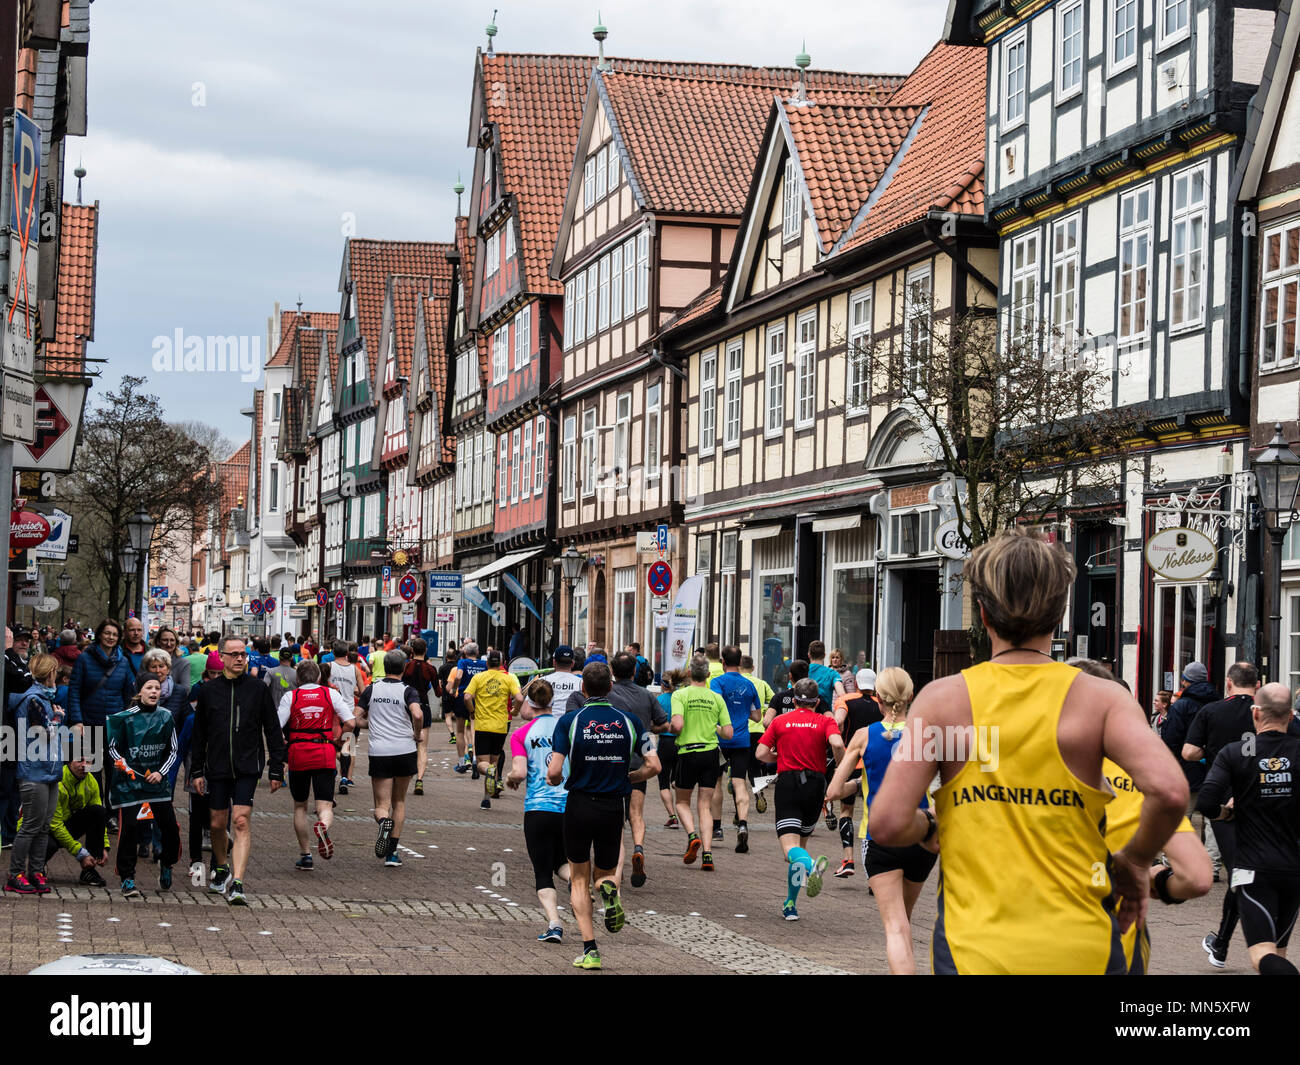 Running event 'Wasalauf', downtown Celle, along half-timbered houses, Celle, Germany Stock Photo